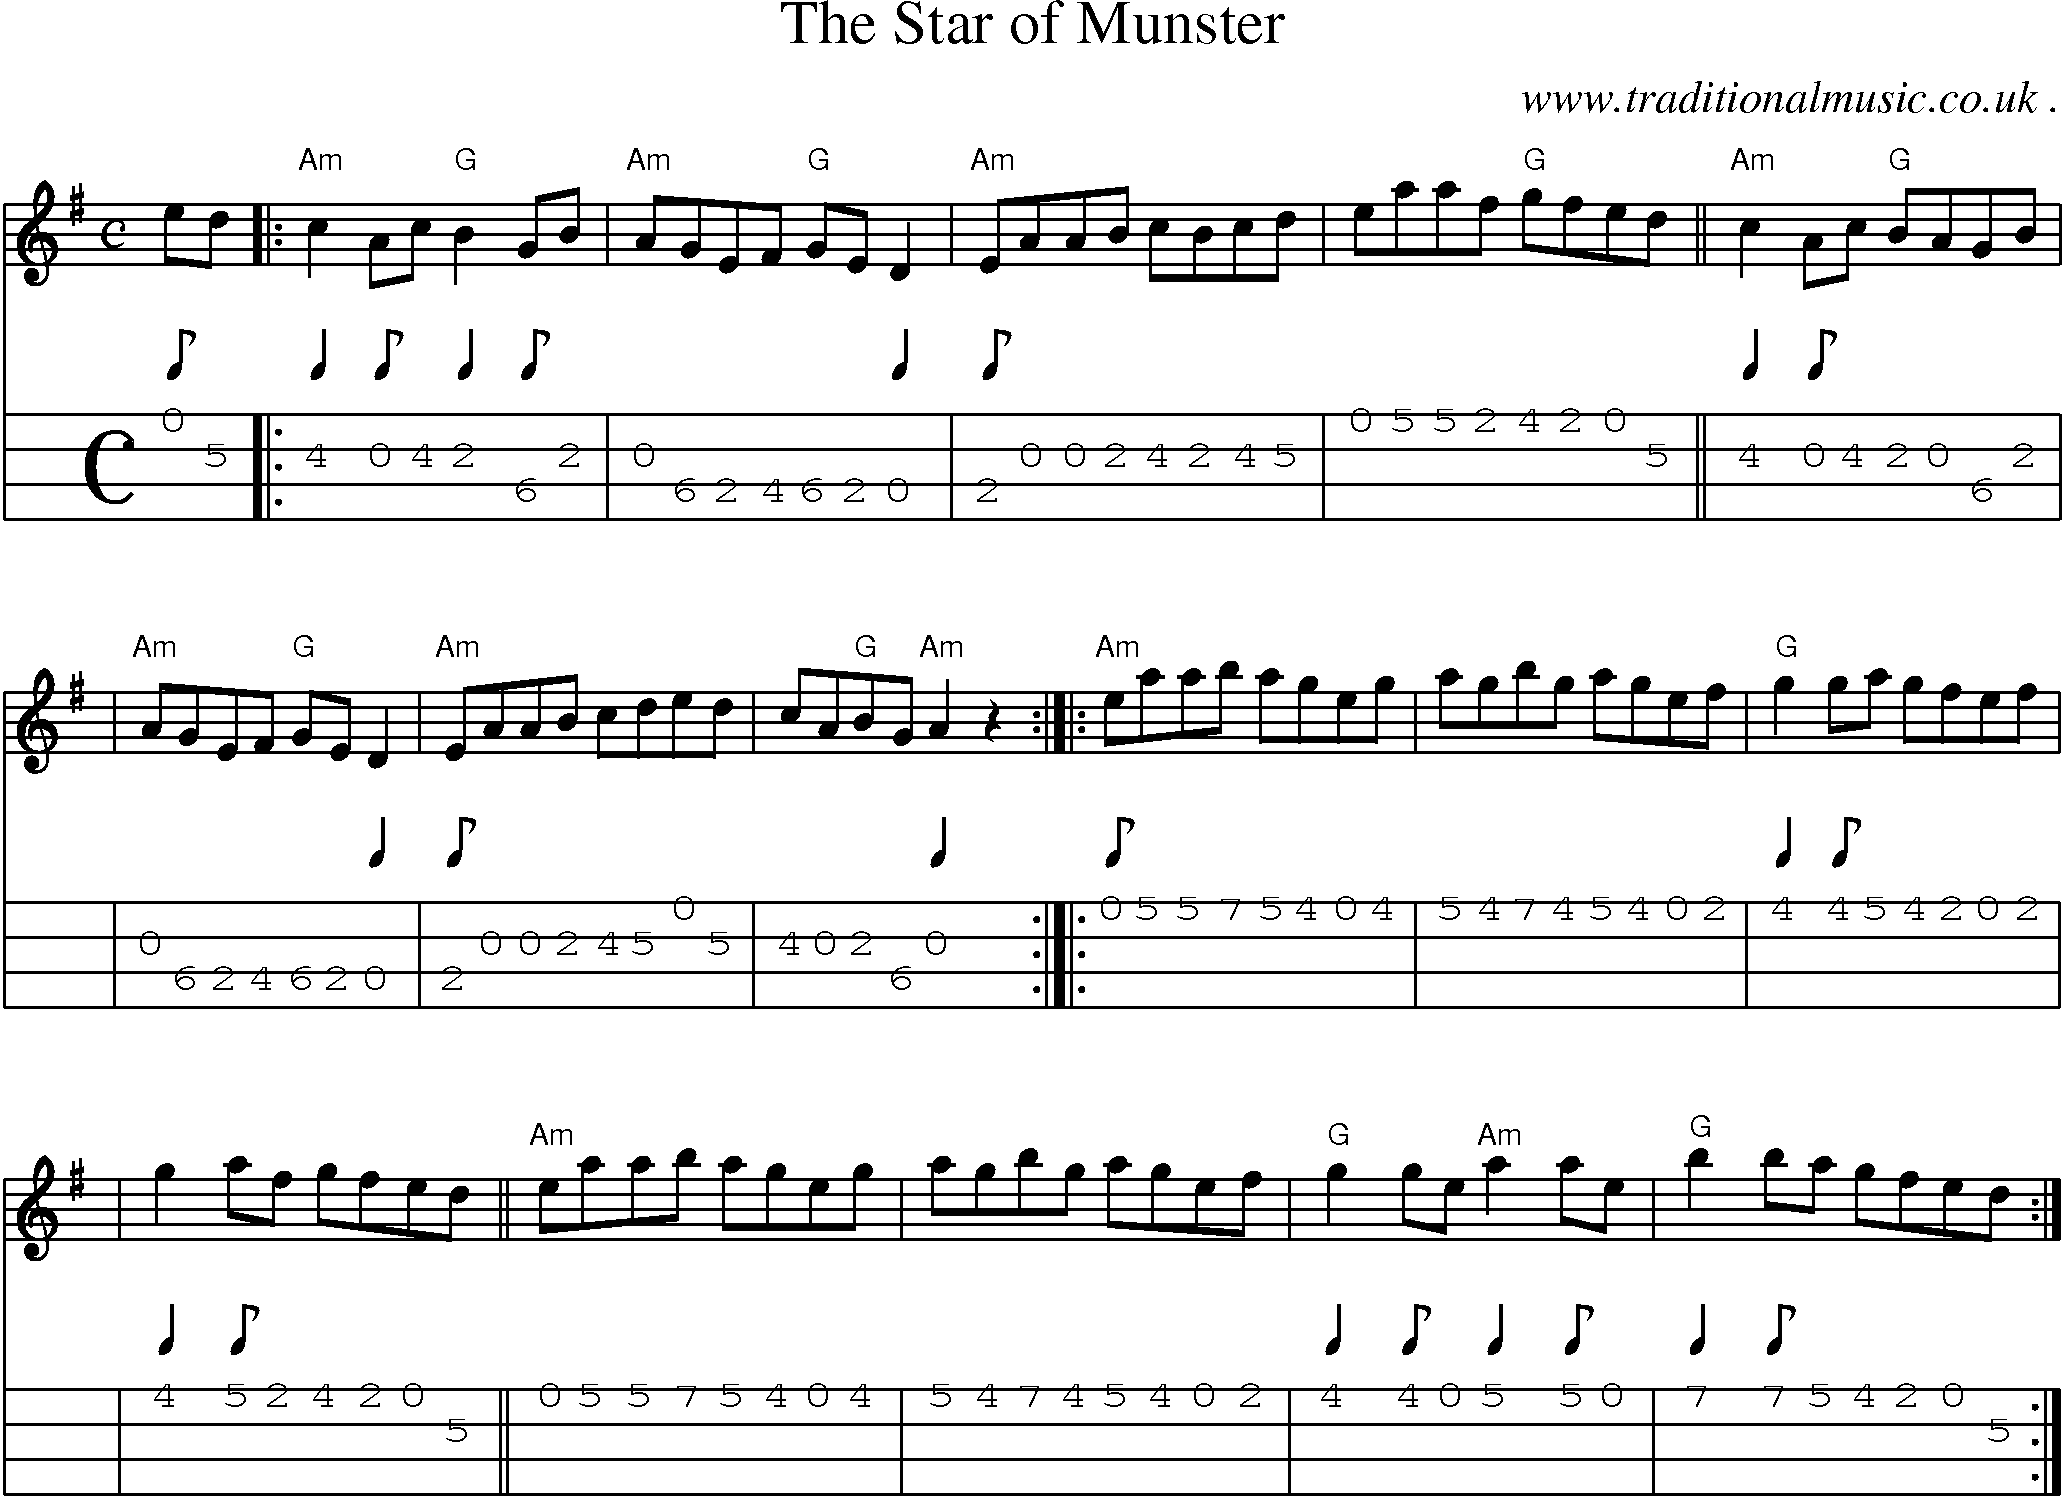 Sheet-music  score, Chords and Mandolin Tabs for The Star Of Munster